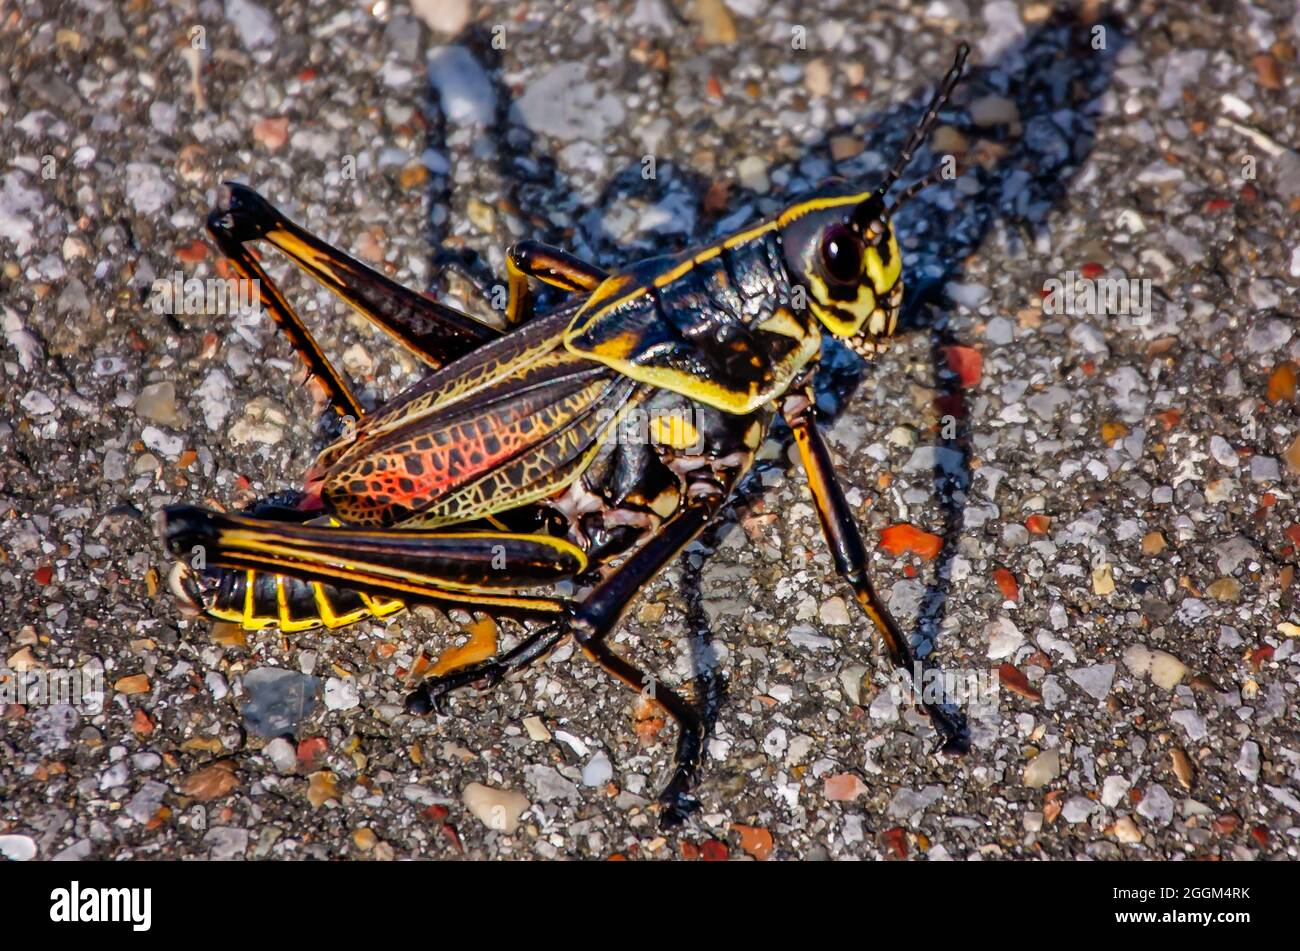 An Eastern lubber grasshopper (Romalea microptera) is pictured